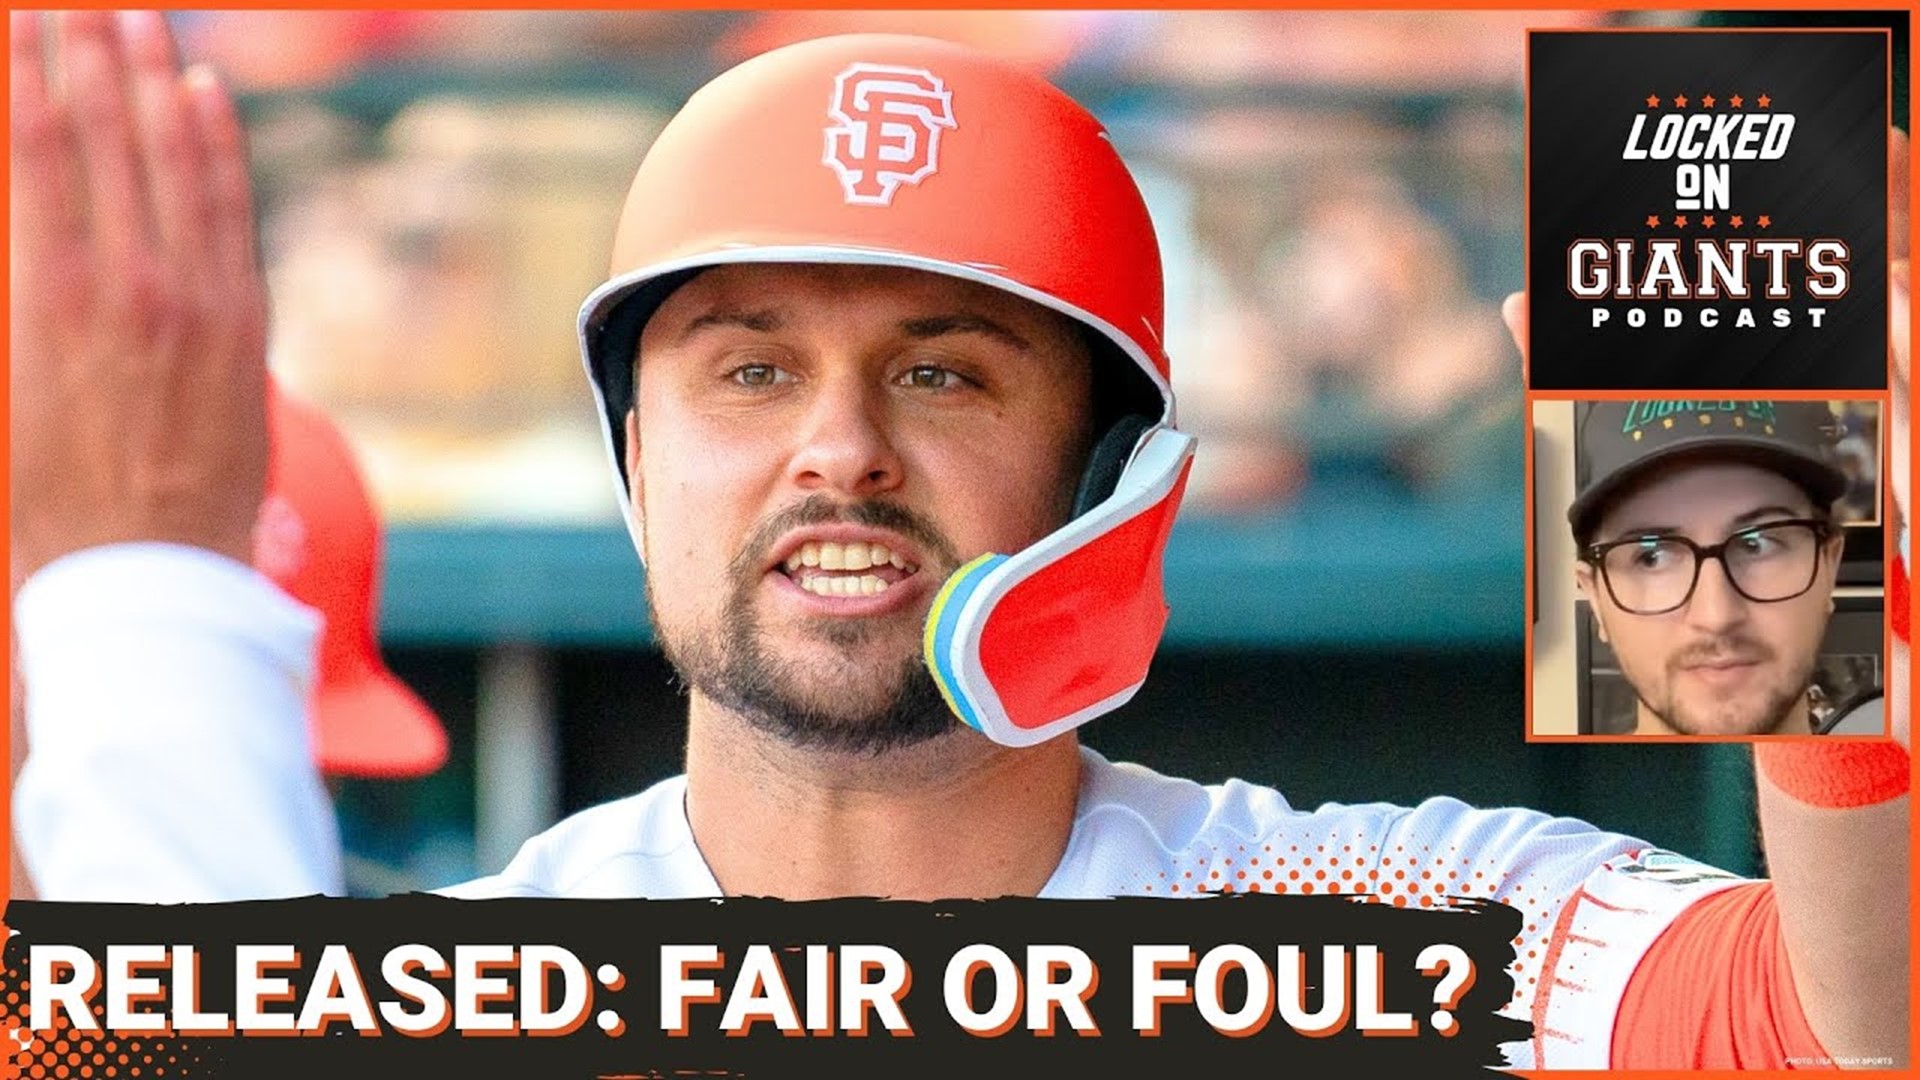 SF Giants' J.D. Davis Drama. Unraveling $6.9M Salary Release - Righteous or Agent's Miscalculation?